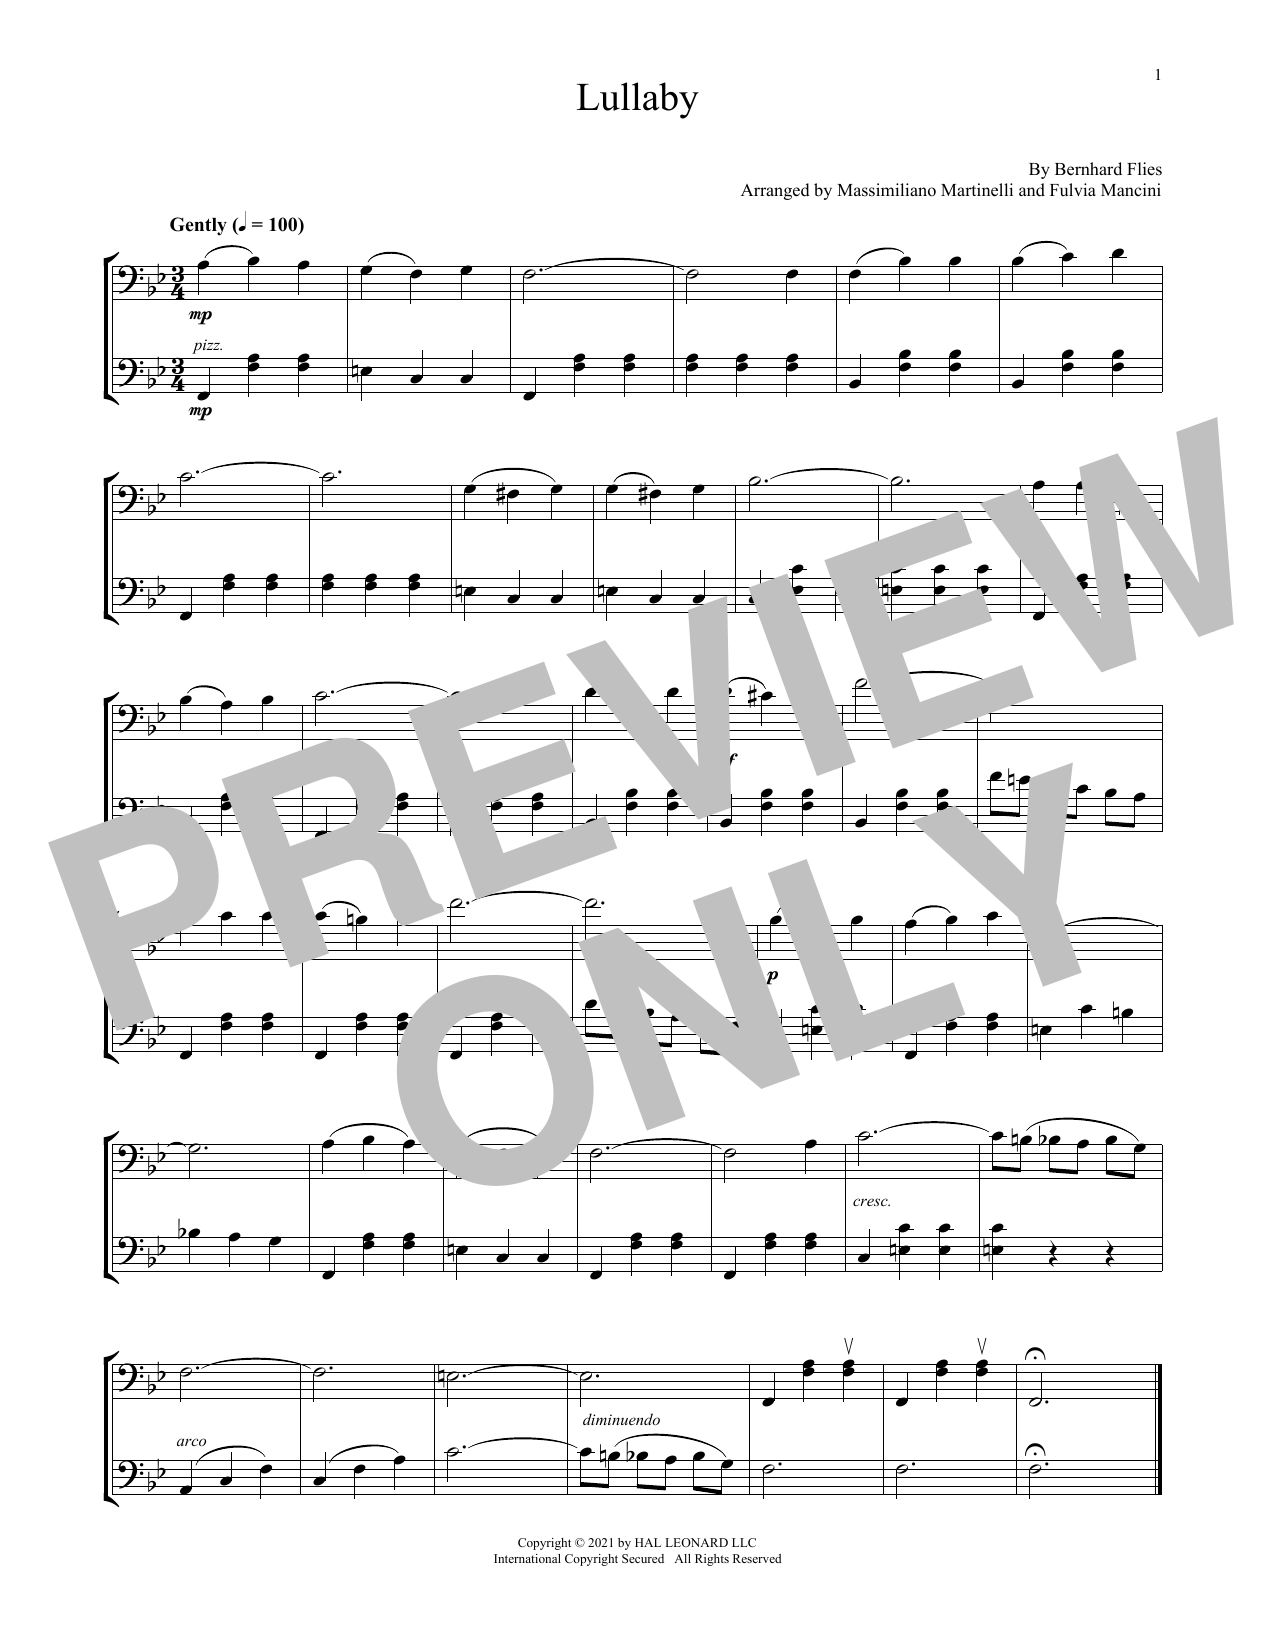 Download Mr & Mrs Cello Lullaby Sheet Music